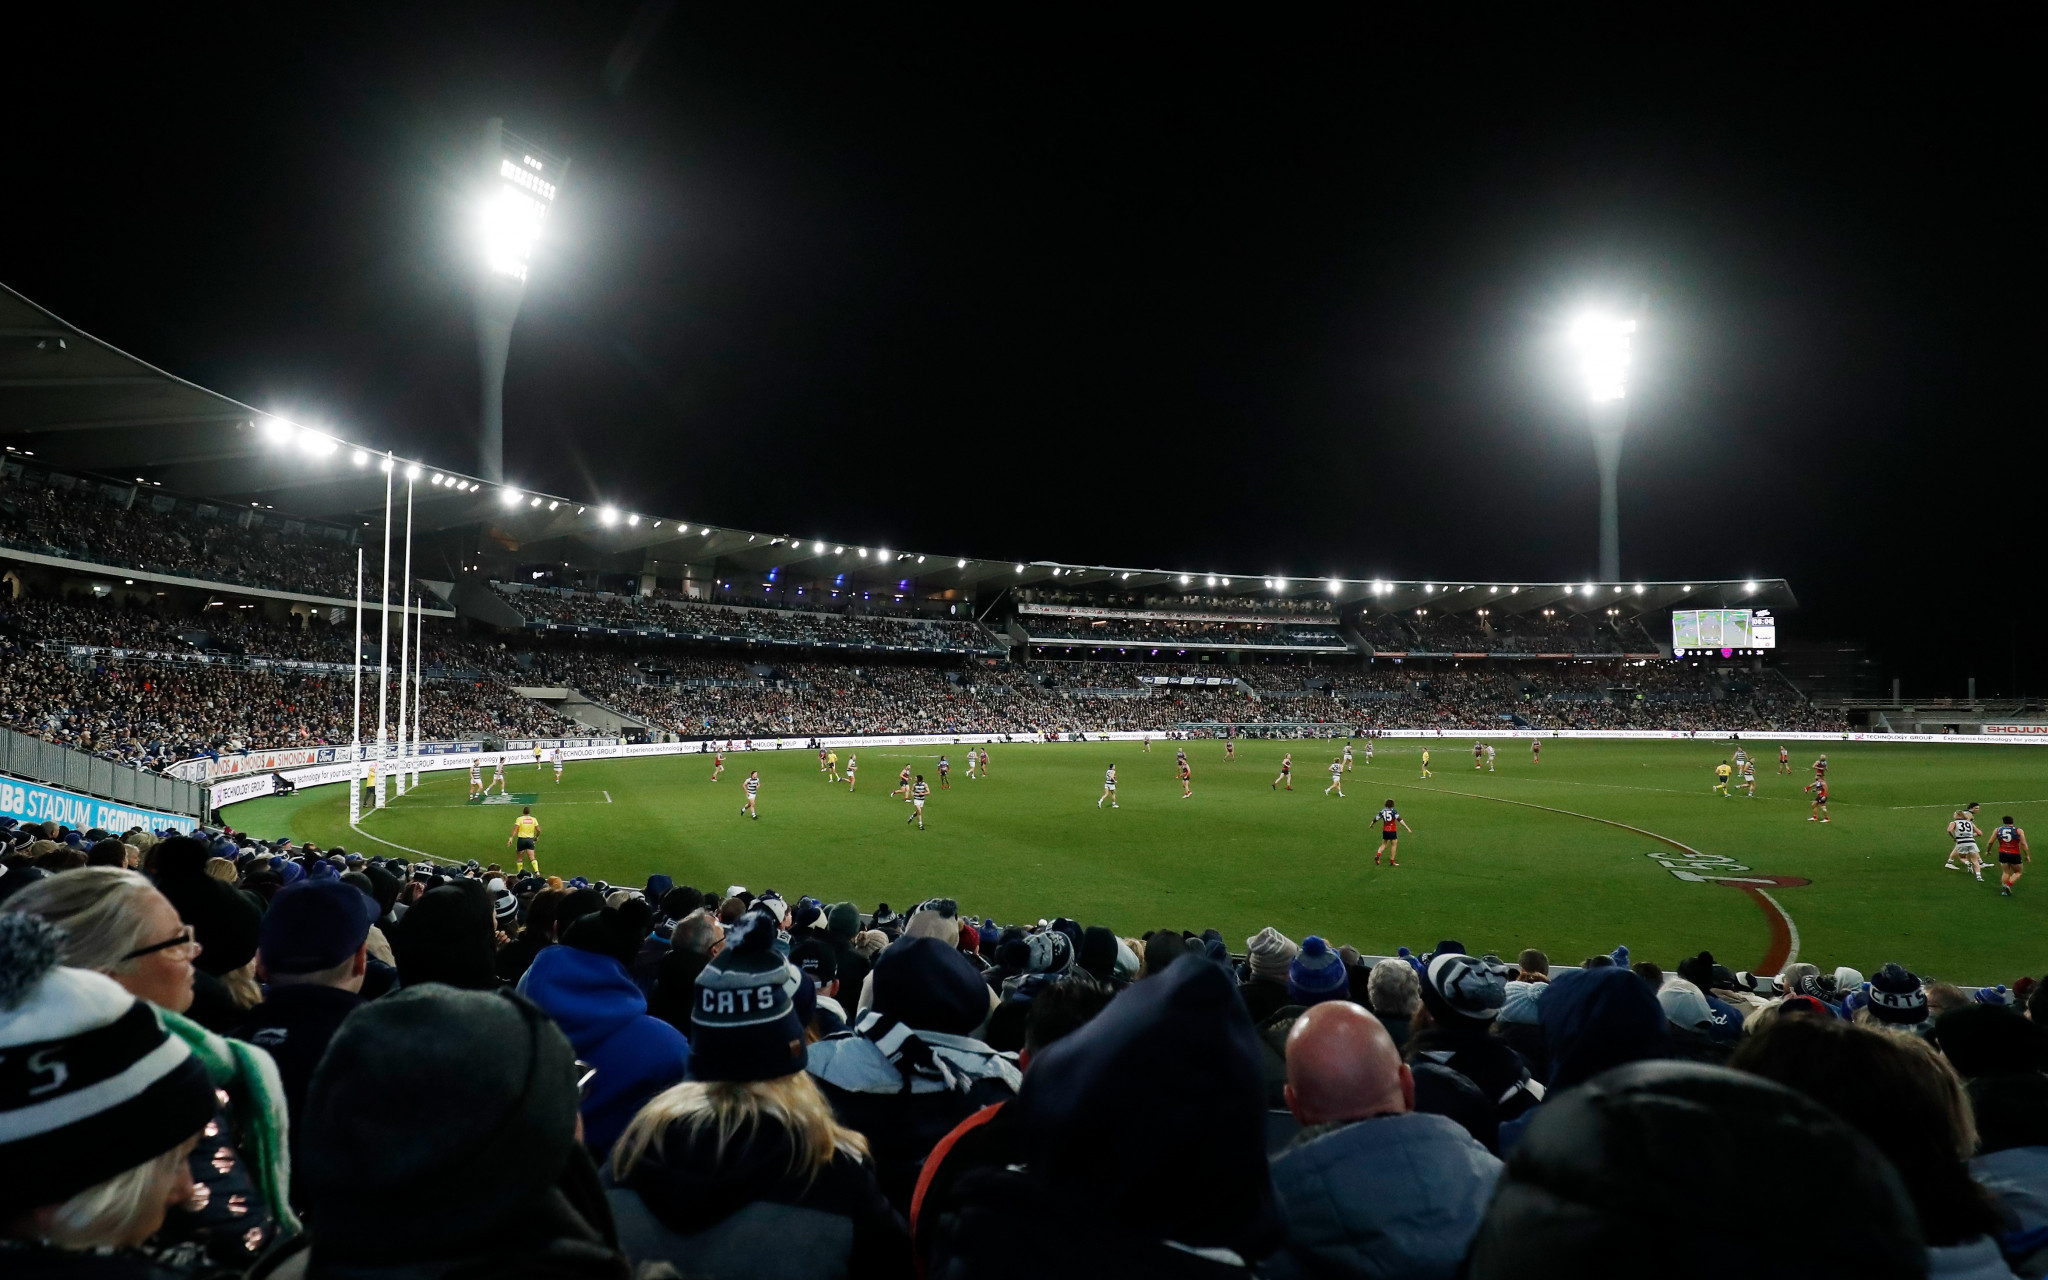 The Liberal Party in Victoria is in favour of holding the Opening and Closing Ceremonies for the Victoria 2026 Games at the GMHBA Stadium in Geelong ©Getty Images